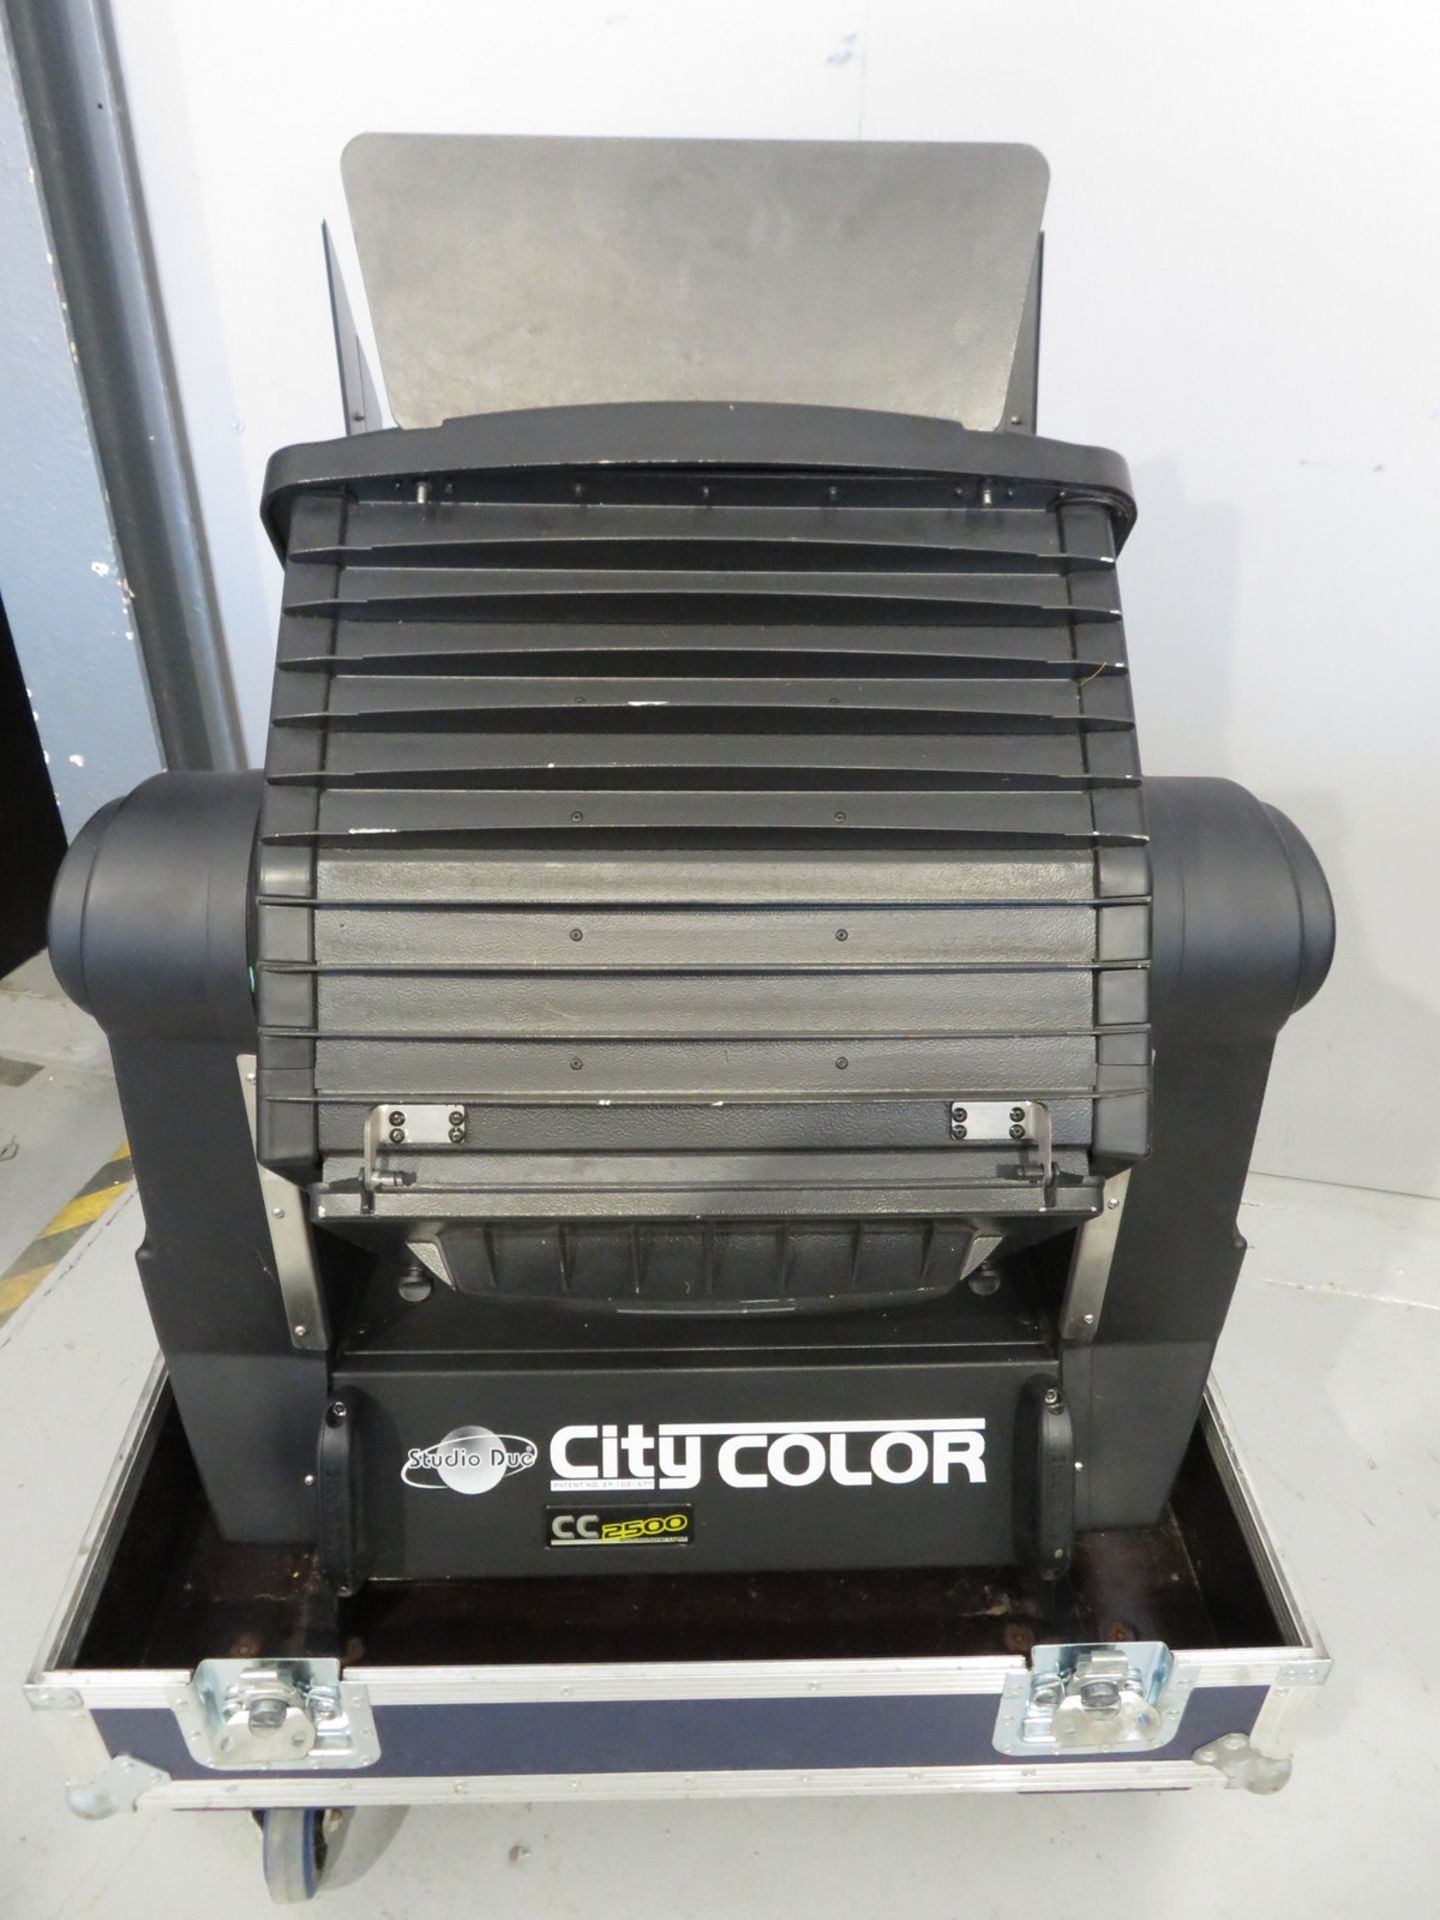 Studio Due City Colour 2500 Wash in flightcase. Working condition. Hours: 850. - Image 7 of 9